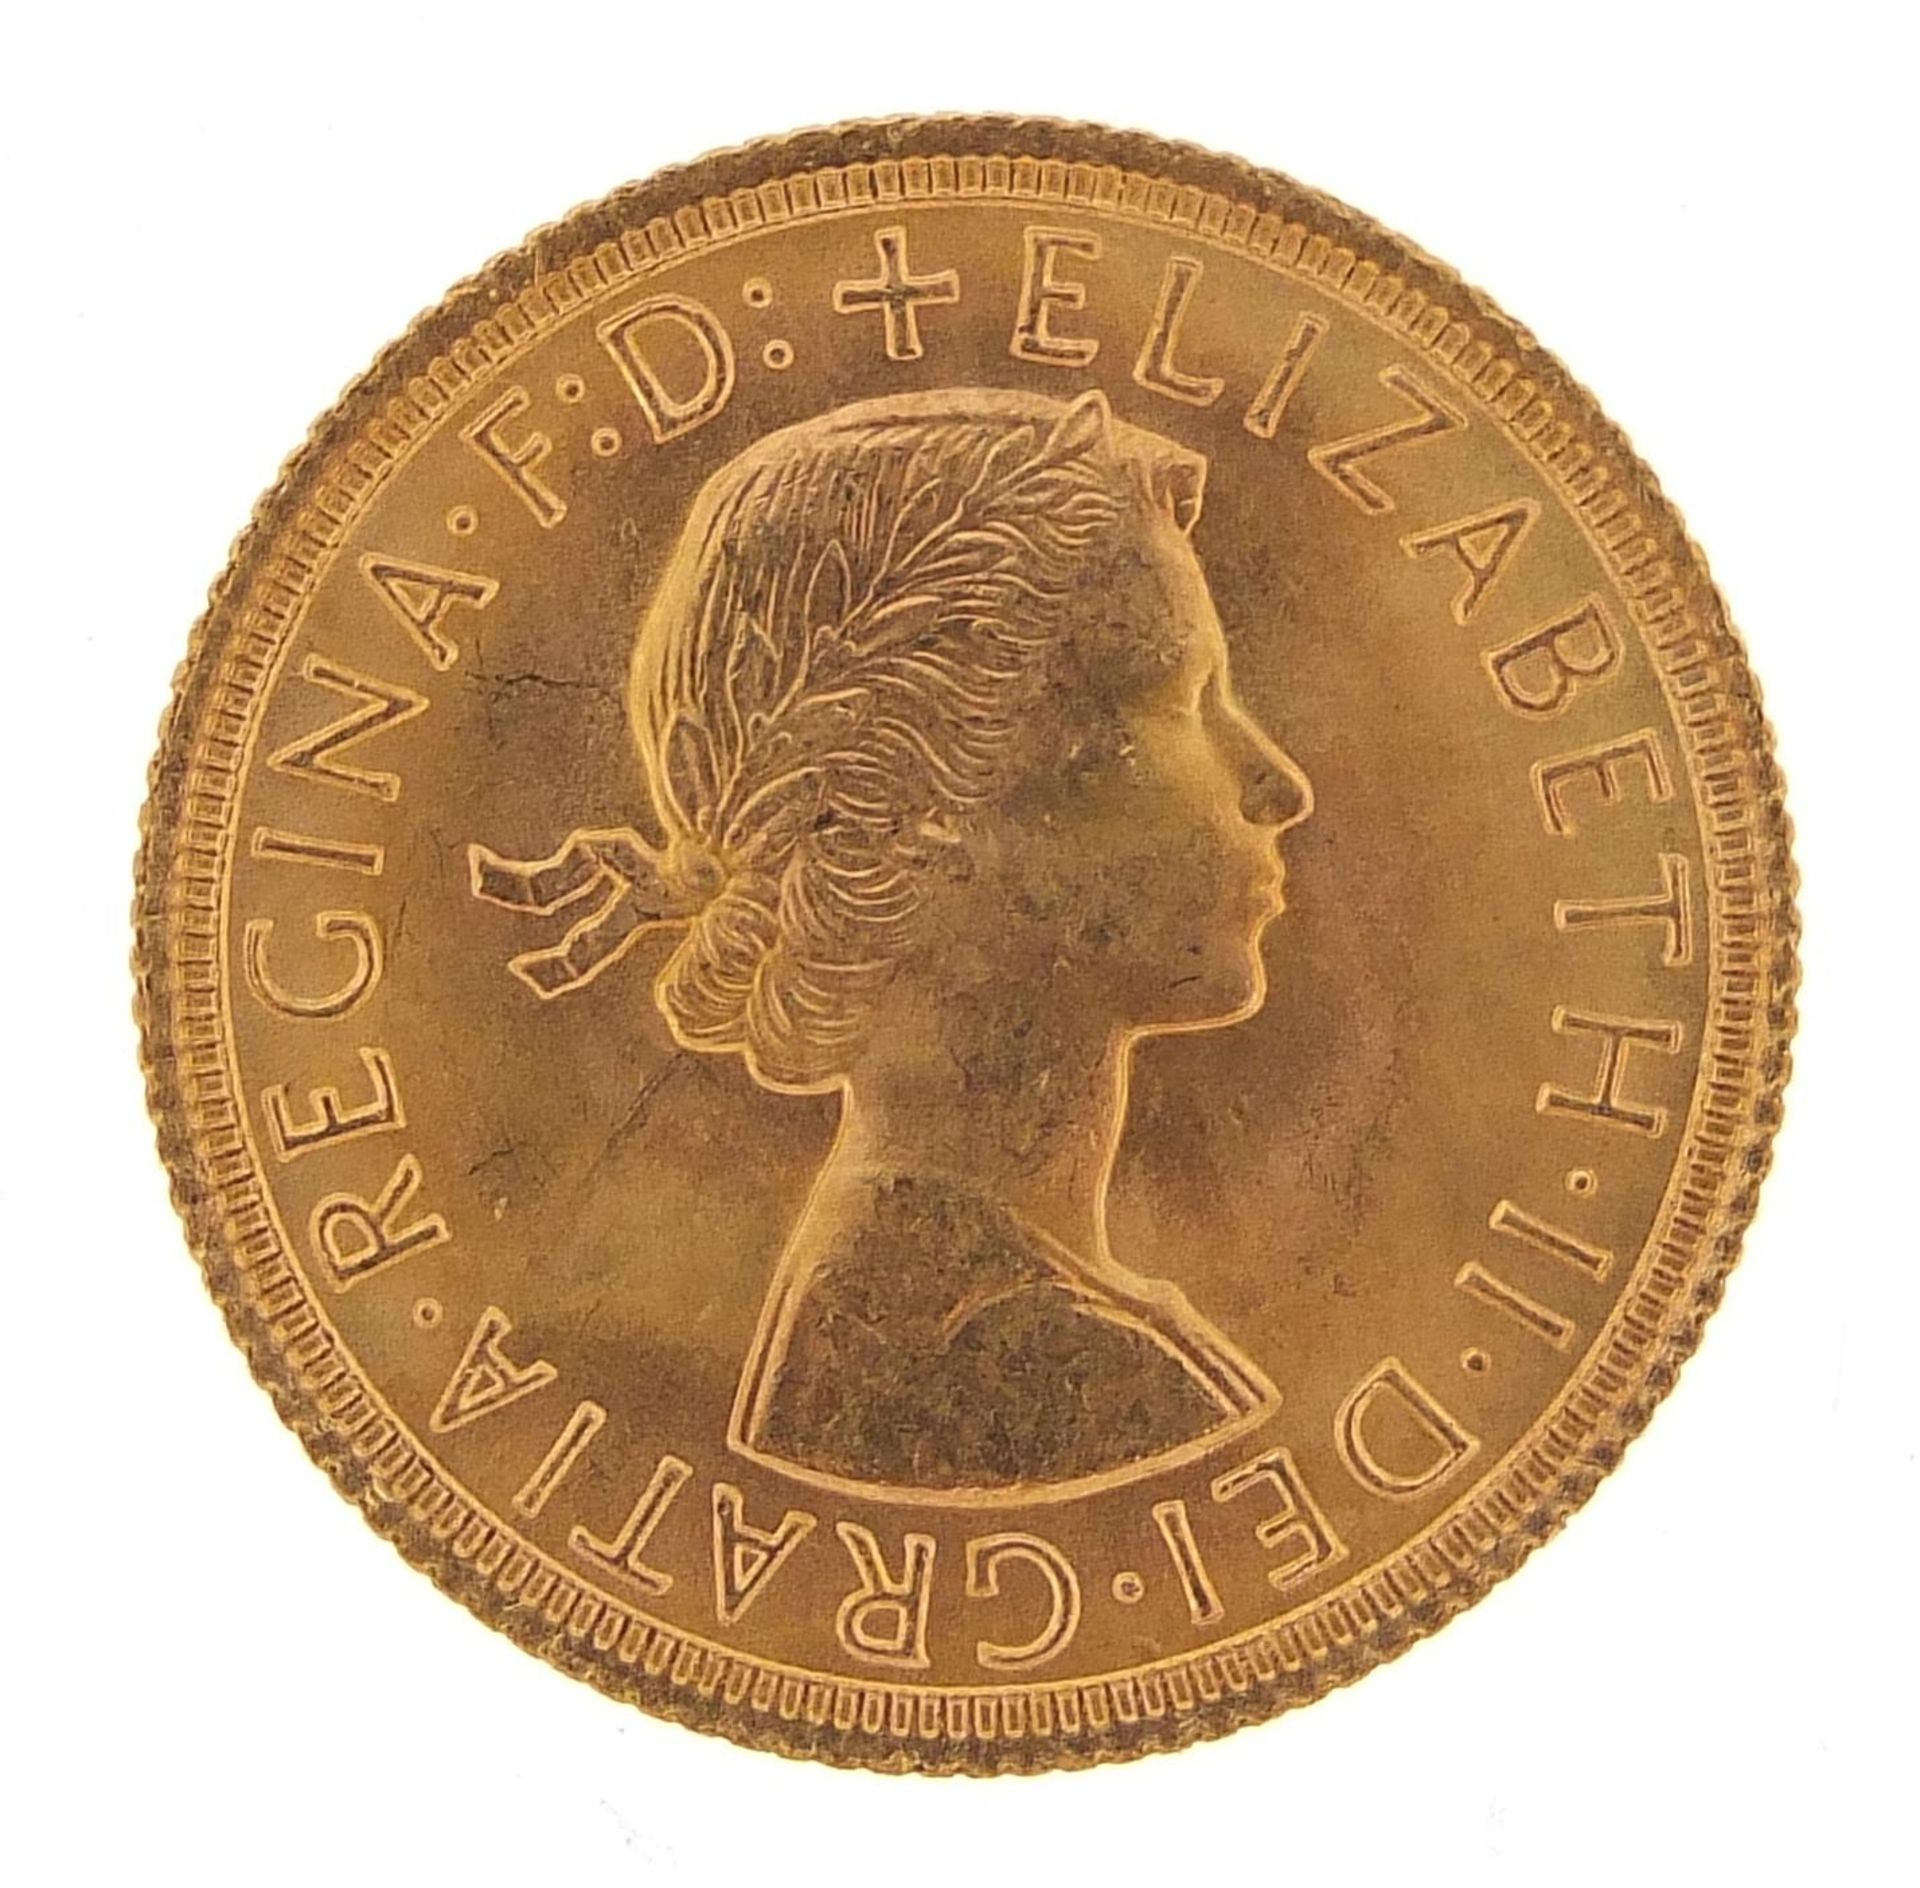 Elizabeth II 1965 gold sovereign - this lot is sold without buyer's premium - Image 2 of 3